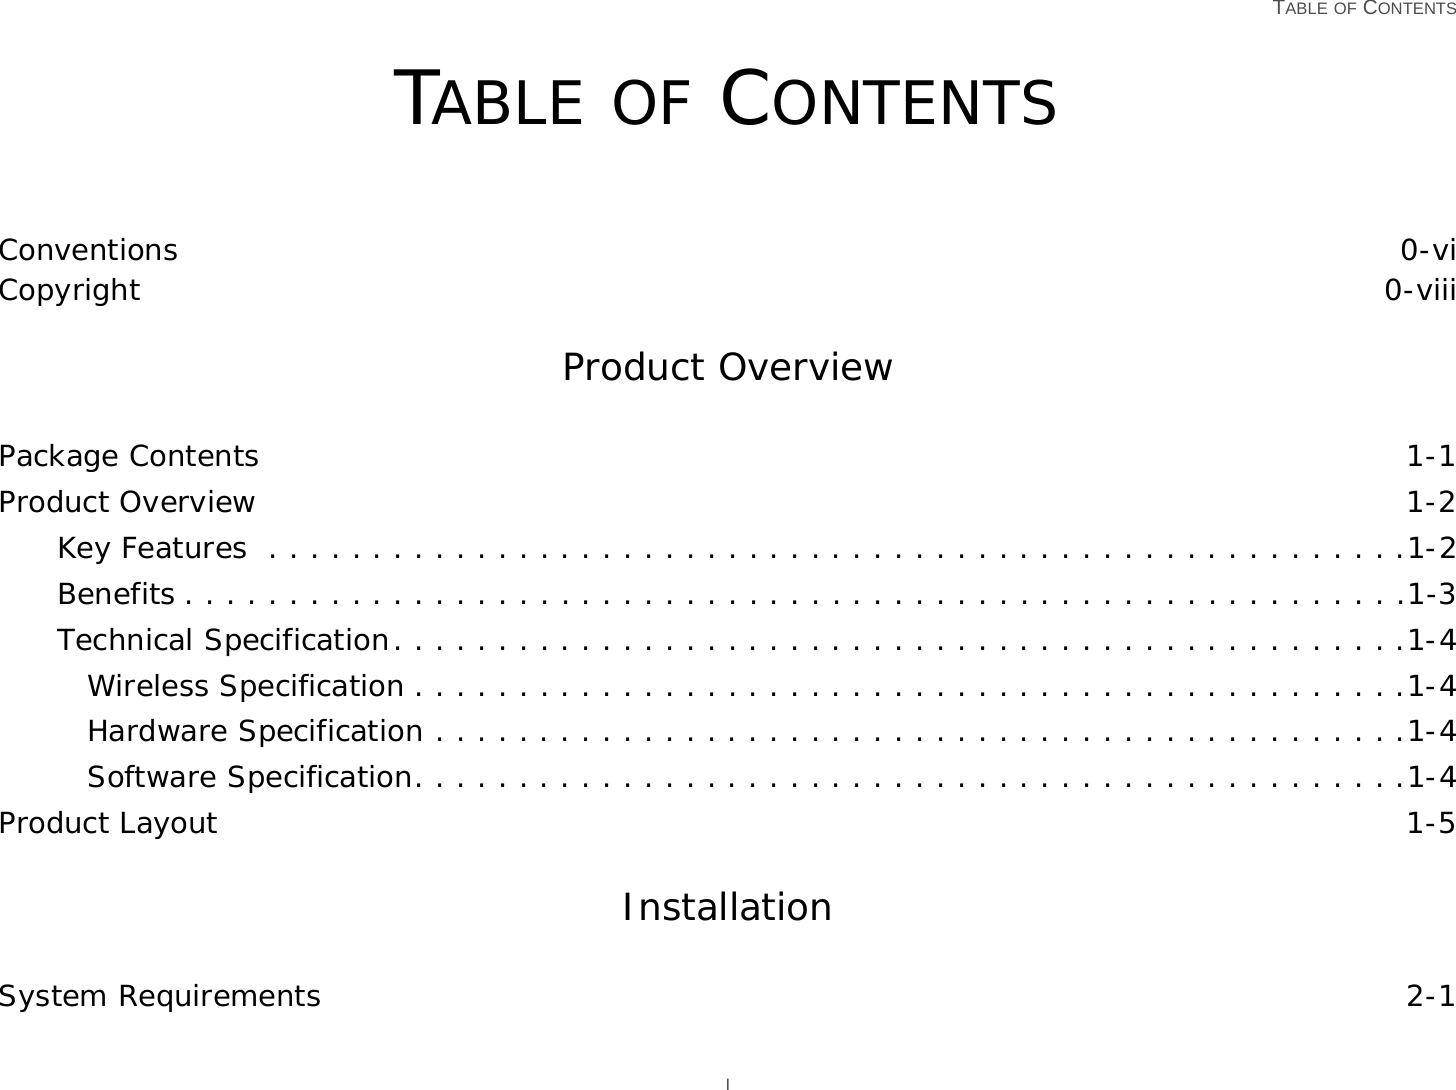   TABLE OF CONTENTS ITABLE OF CONTENTSConventions 0-viCopyright 0-viiiProduct OverviewPackage Contents 1-1Product Overview 1-2Key Features  . . . . . . . . . . . . . . . . . . . . . . . . . . . . . . . . . . . . . . . . . . . . . . . . . . . . . . .1-2Benefits . . . . . . . . . . . . . . . . . . . . . . . . . . . . . . . . . . . . . . . . . . . . . . . . . . . . . . . . . . .1-3Technical Specification. . . . . . . . . . . . . . . . . . . . . . . . . . . . . . . . . . . . . . . . . . . . . . . . .1-4Wireless Specification . . . . . . . . . . . . . . . . . . . . . . . . . . . . . . . . . . . . . . . . . . . . . . . .1-4Hardware Specification . . . . . . . . . . . . . . . . . . . . . . . . . . . . . . . . . . . . . . . . . . . . . . .1-4Software Specification. . . . . . . . . . . . . . . . . . . . . . . . . . . . . . . . . . . . . . . . . . . . . . . .1-4Product Layout 1-5InstallationSystem Requirements 2-1